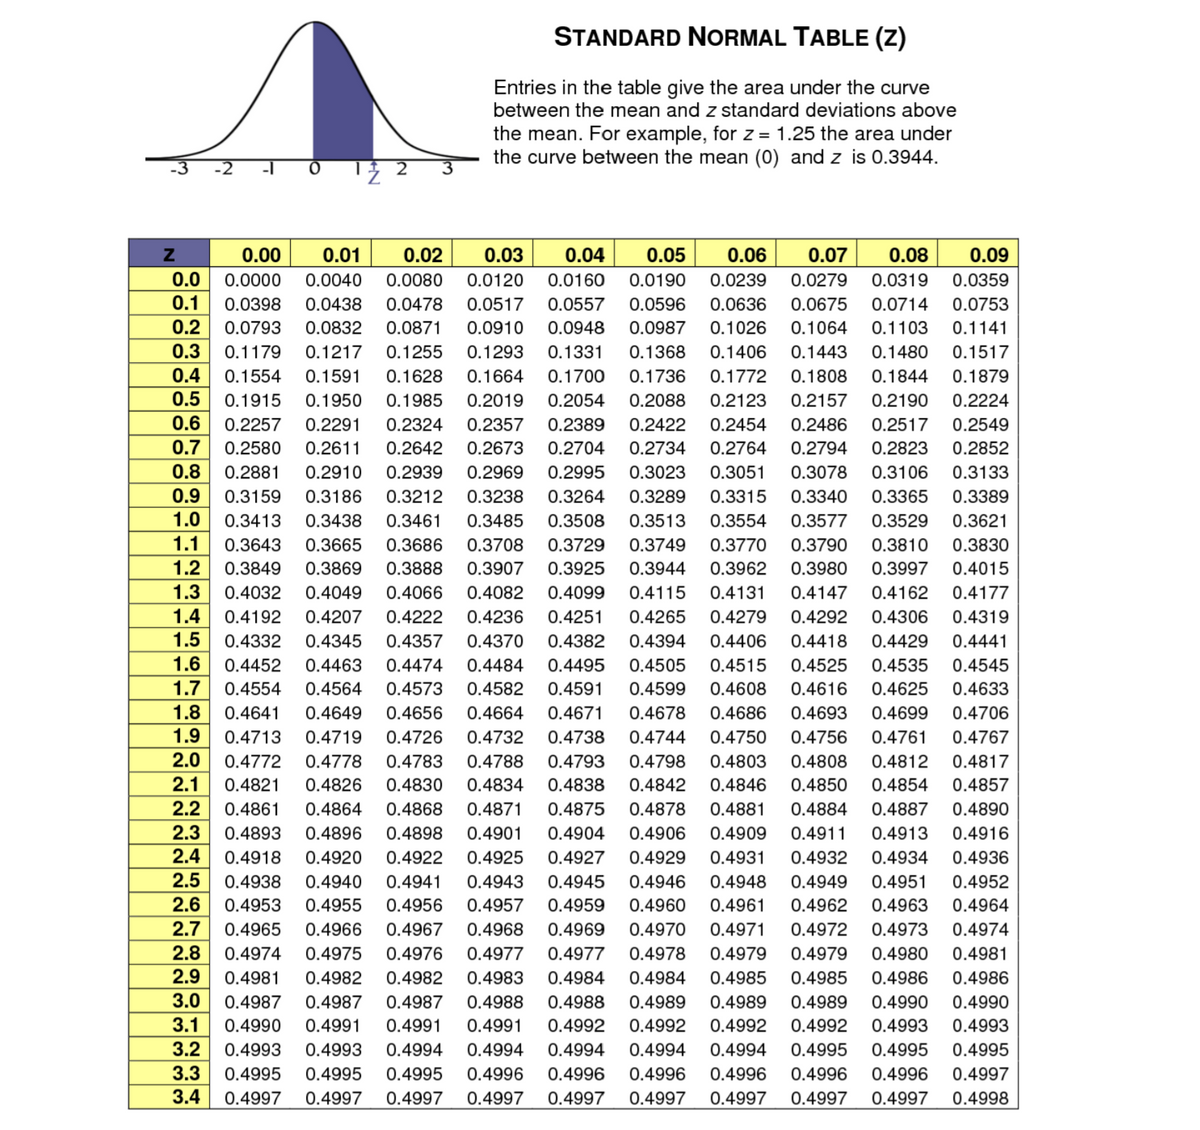 STANDARD NORMAL TABLE (z)
Entries in the table give the area under the curve
between the mean and z standard deviations above
the mean. For example, for z = 1.25 the area under
the curve between the mean (0) and z is 0.3944.
0.00
0.01
0.02
0.03
0.04
0.05
0.06
0.07
0.08
0.09
0.0
0.0000
0.0040
0.0080
0.0120
0.0160
0.0190
0.0239
0.0279
0.0319
0.0359
0.1
0.0398
0.0438
0.0478
0.0517
0.0557
0.0596
0.0636
0.0675
0.0714
0.0753
0.2
0.0793
0.0832
0.0871
0.0910
0.0948
0.0987
0.1026
0.1064
0.1103
0.1141
0.3
0.4
0.1179
0.1217
0.1255
0.1293
0.1331
0.1368
0.1406
0.1443
0.1480
0.1517
0.1554
0.1591
0.1628
0.1664
0.1700
0.1736
0.1772
0.1808
0.1844
0.1879
0.5
0.1915
0.1950
0.1985
0.2019
0.2054
0.2088
0.2123
0.2157
0.2190
0.2224
0.6
0.2257
0.2291
0.2324
0.2357
0.2389
0.2422
0.2454
0.2486
0.2517
0.2549
0.7
0.2580
0.2611
0.2642
0.2673
0.2704
0.2734
0.2764
0.2794
0.2823
0.2852
0.8
0.2881
0.2910
0.2939
0.2969
0.2995
0.3023
0.3051
0.3078
0.3106
0.3133
0.9
0.3159
0.3186
0.3212
0.3238
0.3264
0.3289
0.3315
0.3340
0.3365
0.3389
1.0
0.3413
0.3438
0.3461
0.3485
0.3508
0.3513
0.3554
0.3577
0.3529
0.3621
1.1
0.3643
0.3665
0.3686
0.3708
0.3729
0.3749
0.3770
0.3790
0.3810
0.3830
1.2
0.3849
0.3869
0.3888
0.3907
0.3925
0.3944
0.3962
0.3980
0.3997
0.4015
1.3
0.4032
0.4049
0.4066
0.4082
0.4099
0.4115
0.4131
0.4147
0.4162
0.4177
1.4
0.4192
0.4207
0.4222
0.4236
0.4251
0.4265
0.4279
0.4292
0.4306
0.4319
1.5
0.4332
0.4345
0.4357
0.4370
0.4382
0.4394
0.4406
0.4418
0.4429
0.4441
1.6
0.4452
0.4463
0.4474
0.4484
0.4495
0.4505
0.4515
0.4525
0.4535
0.4545
1.7
0.4554
0.4564
0.4573
0.4582
0.4591
0.4599
0.4608
0.4616
0.4625
0.4633
1.8
0.4641
0.4649
0.4656
0.4664
0.4671
0.4678
0.4686
0.4693
0.4699
0.4706
1.9
0.4713
0.4719
0.4726
0.4732
0.4738
0.4744
0.4750
0.4756
0.4761
0.4767
2.0
0.4772
0.4778
0.4783
0.4788
0.4793
0.4798
0.4803
0.4808
0.4812
0.4817
2.1
0.4821
0.4826
0.4830
0.4834
0.4838
0.4842
0.4846
0.4850
0.4854
0.4857
2.2
0.4861
0.4864
0.4868
0.4871
0.4875
0.4878
0.4881
0.4884
0.4887
0.4890
2.3
0.4893
0.4896
0.4898
0.4901
0.4904
0.4906
0.4909
0.4911
0.4913
0.4916
2.4
0.4918
0.4920
0.4922
0.4925
0.4927
0.4929
0.4931
0.4932
0.4934
0.4936
2.5
0.4938
0.4940
0.4941
0.4943
0.4945
0.4946
0.4948
0.4949
0.4951
0.4952
2.6
0.4953
0.4955
0.4956
0.4957
0.4959
0.4960
0.4961
0.4962
0.4963
0.4964
2.7
0.4965
0.4966
0.4967
0.4968
0.4969
0.4970
0.4971
0.4972
0.4973
0.4974
2.8
2.9
0.4974
0.4975
0.4976
0.4977
0.4977
0.4978
0.4979
0.4979
0.4980
0.4981
0.4981
0.4982
0.4982
0.4983
0.4984
0.4984
0.4985
0.4985
0.4986
0.4986
3.0
0.4987
0.4987
0.4987
0.4988
0.4988
0.4989
0.4989
0.4989
0.4990
0.4990
3.1
0.4990
0.4991
0.4991
0.4991
0.4992
0.4992
0.4992
0.4992
0.4993
0.4993
3.2
0.4993
0.4993
0.4994
0.4994
0.4994
0.4994
0.4994
0.4995
0.4995
0.4995
3.3
0.4995
0.4995
0.4995
0.4996
0.4996
0.4996
0.4996
0.4996
0.4996
0.4997
3.4
0.4997
0.4997
0.4997
0.4997
0.4997
0.4997
0.4997
0.4997
0.4997
0.4998
